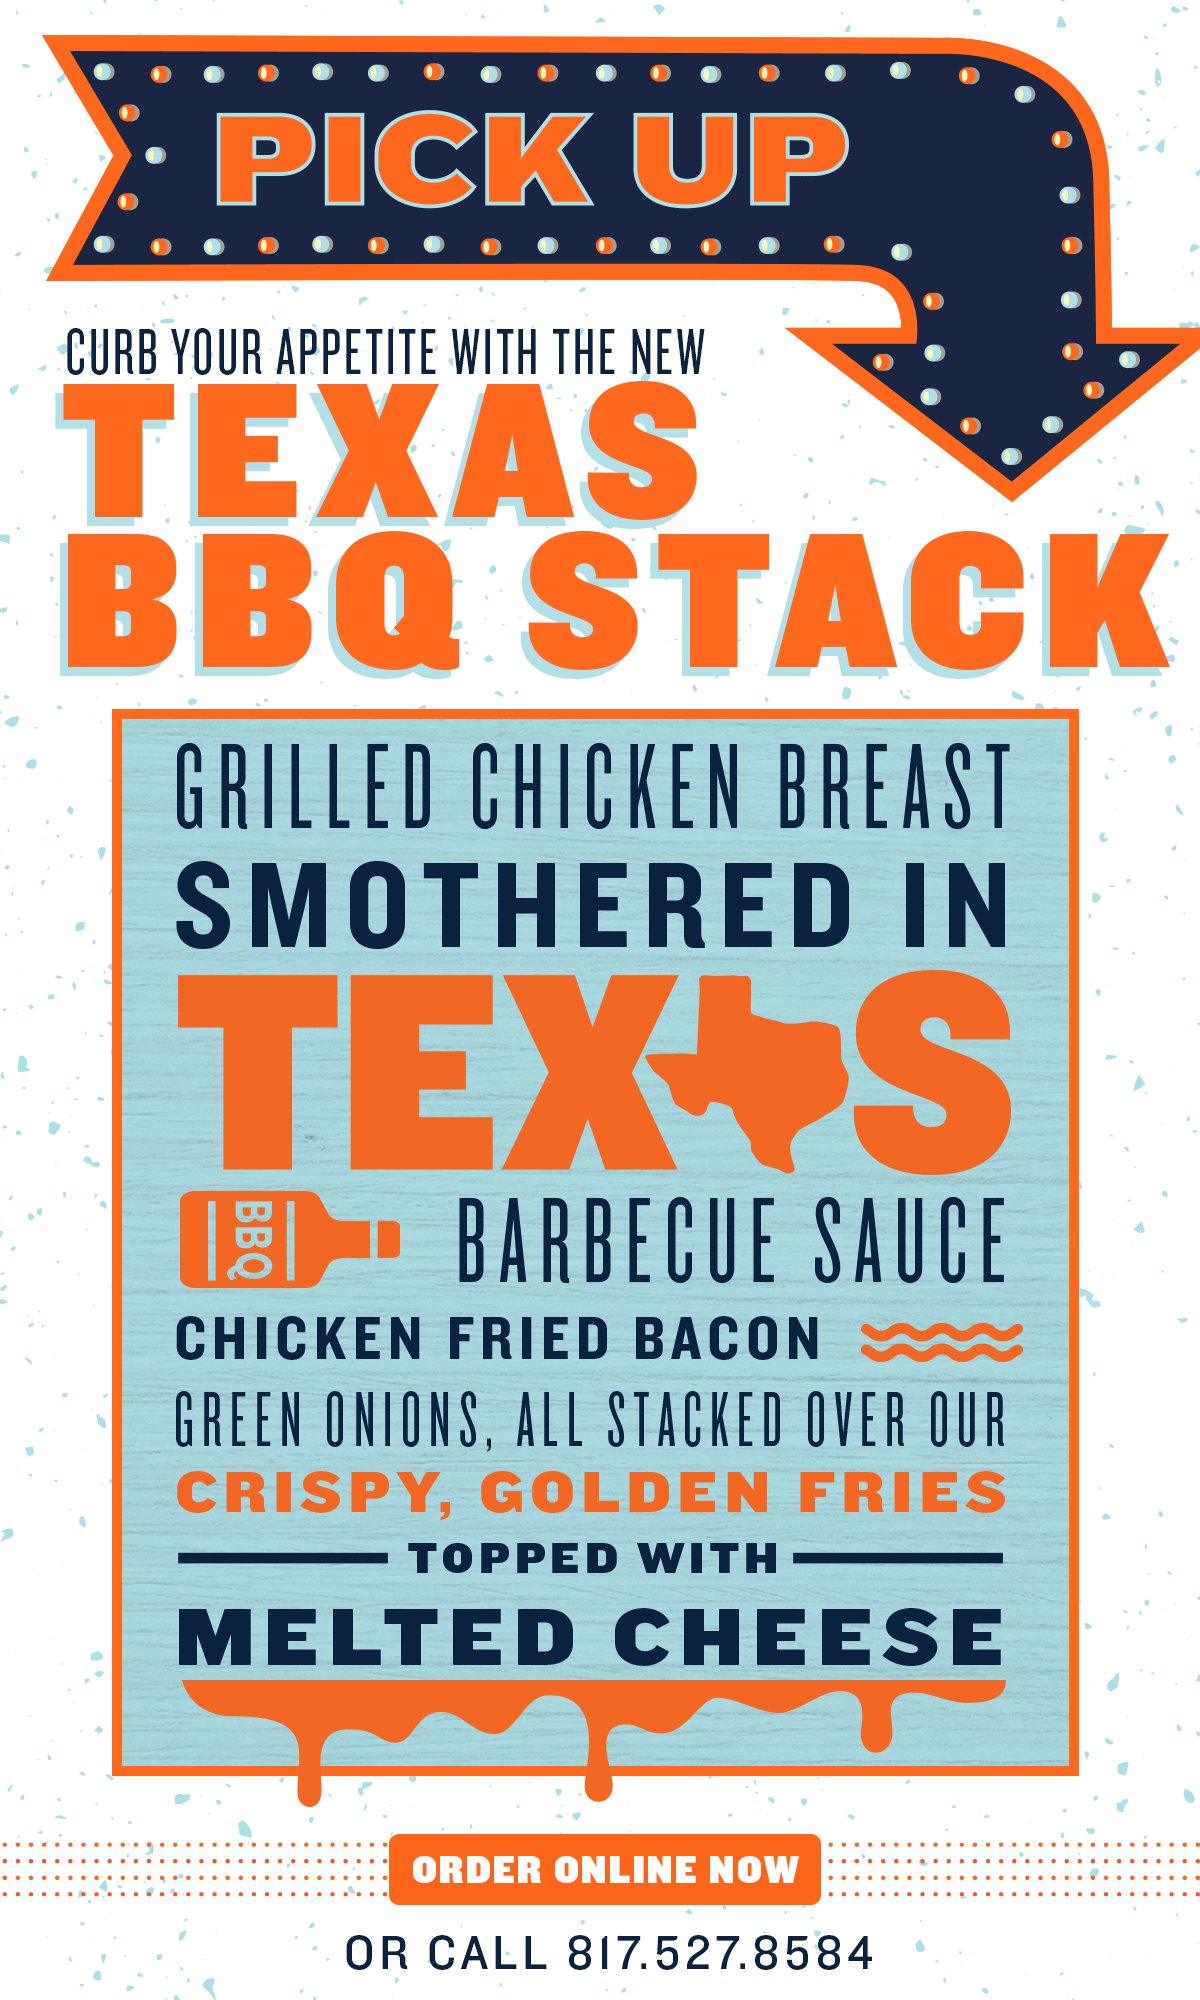 Have you tried the Texas BBQ Stack yet?!